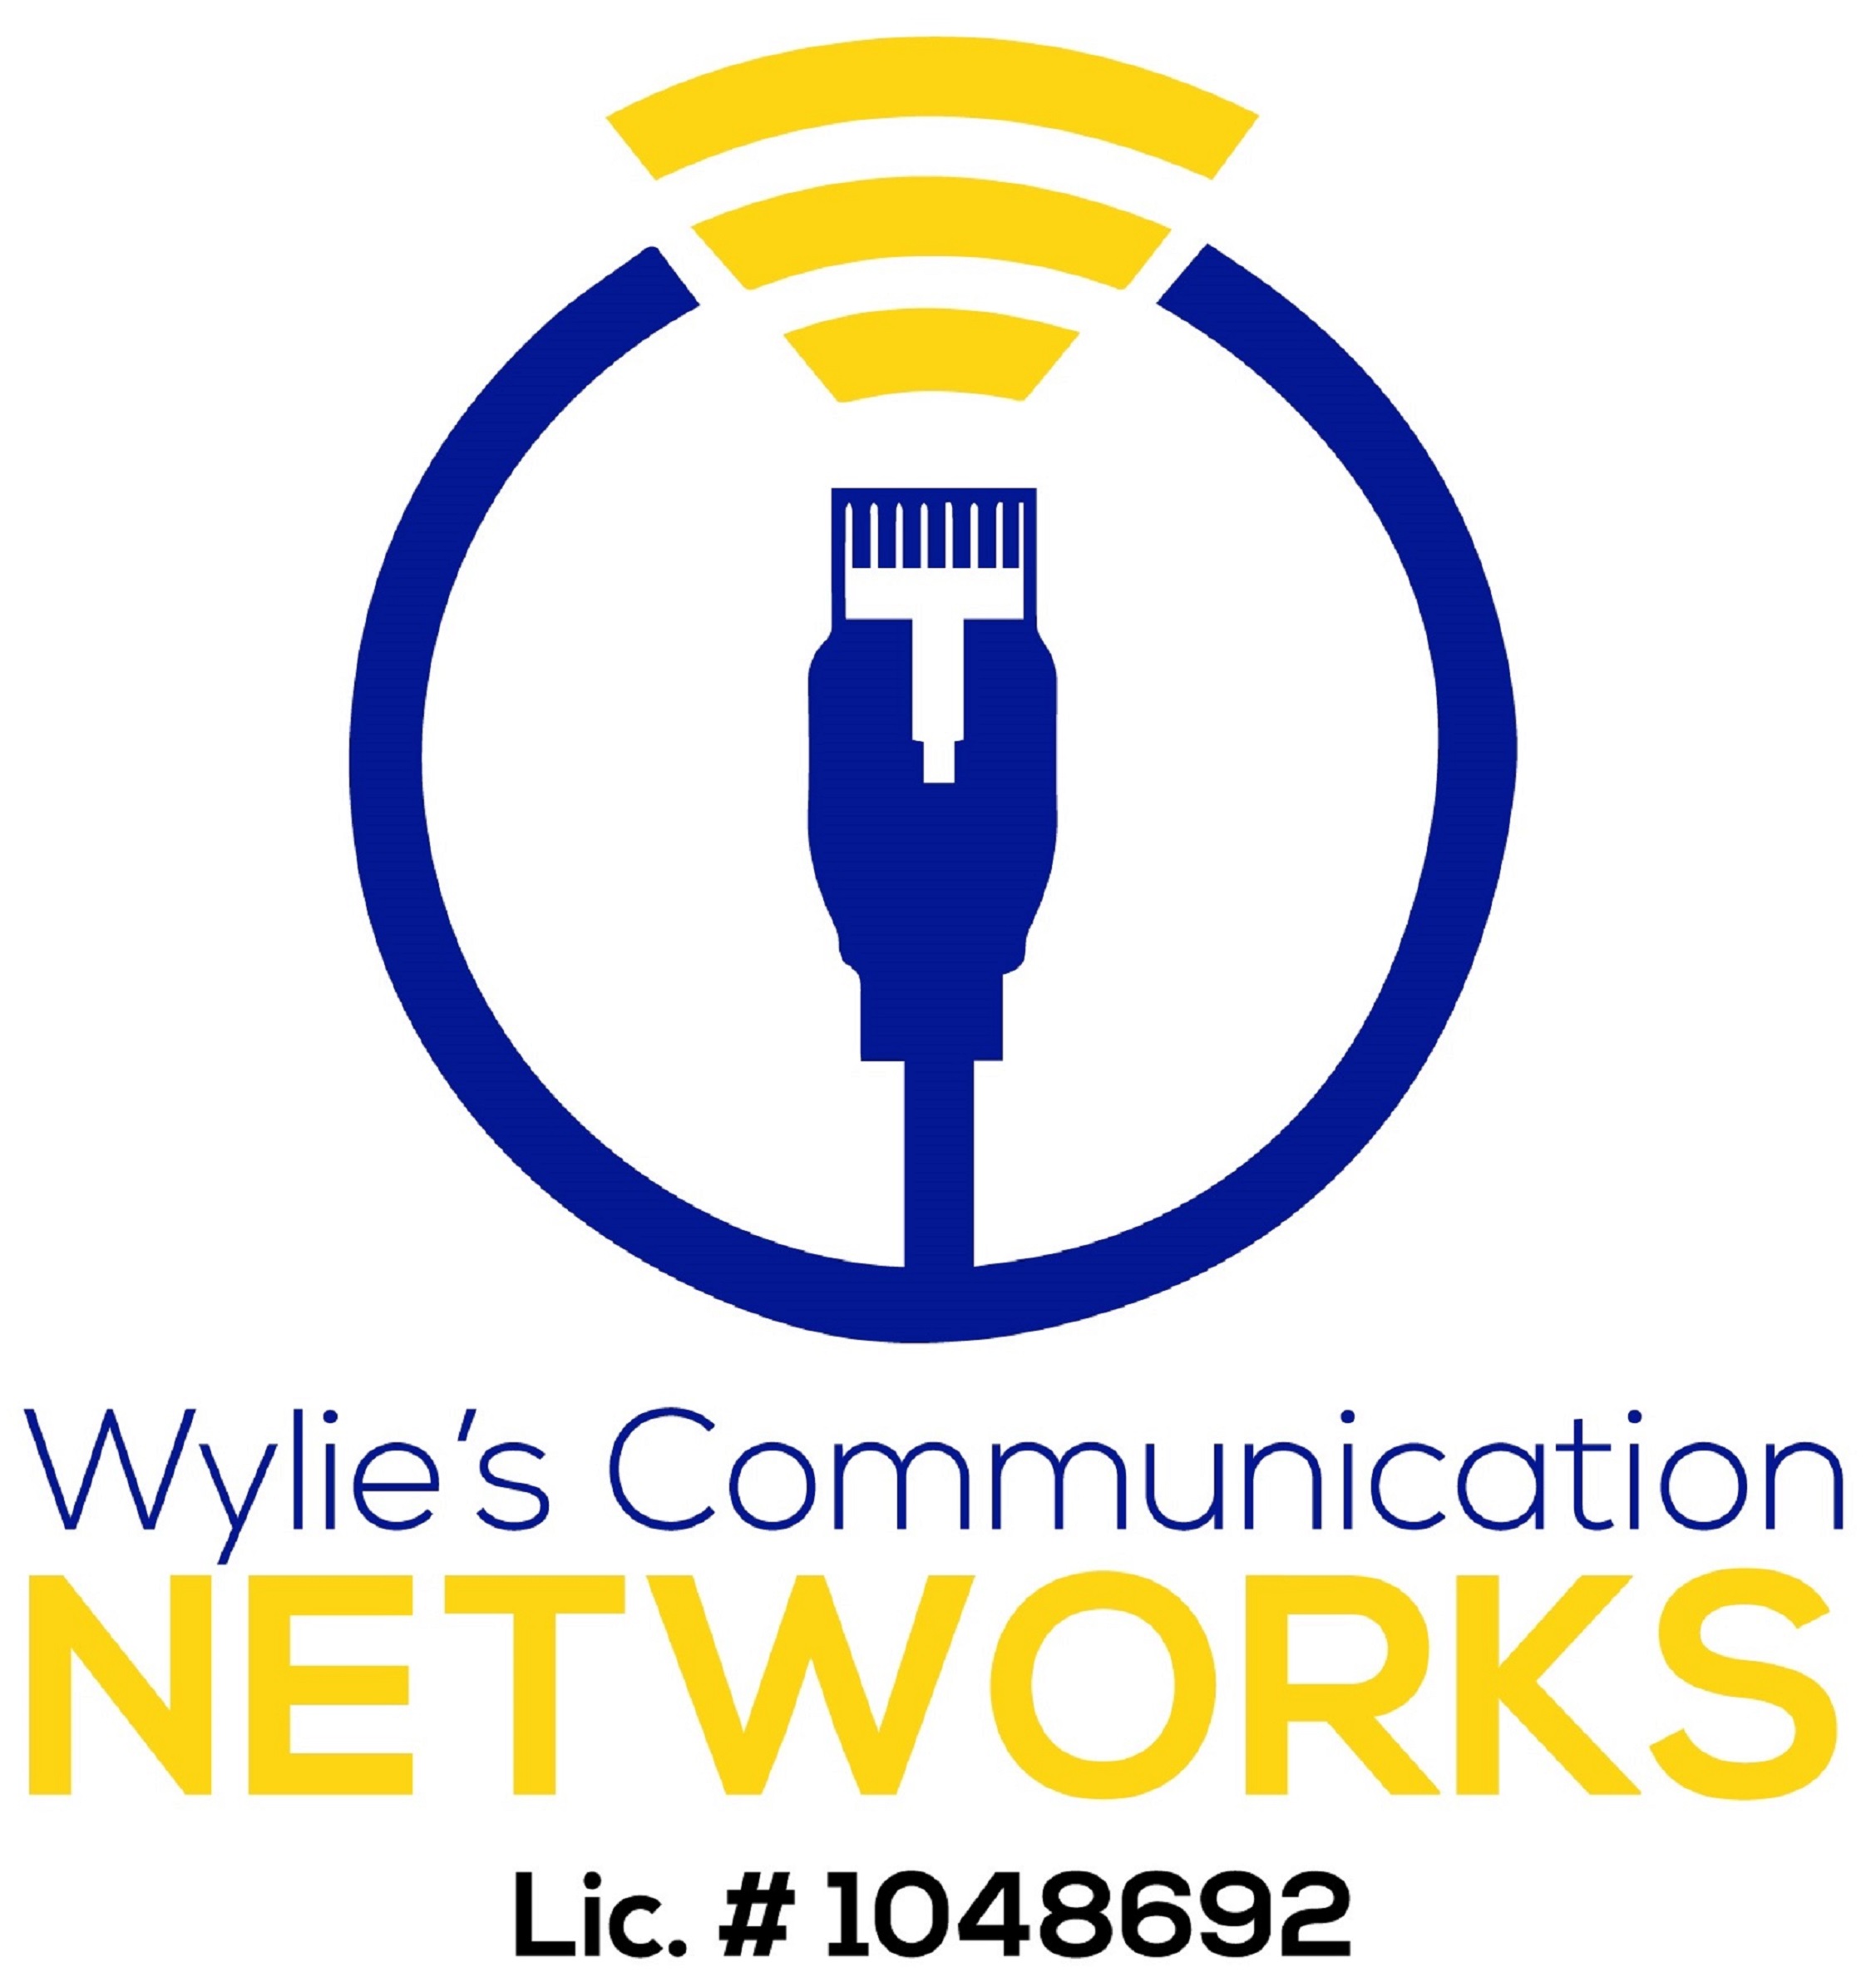 Wylie's Communication Networks License #1048692